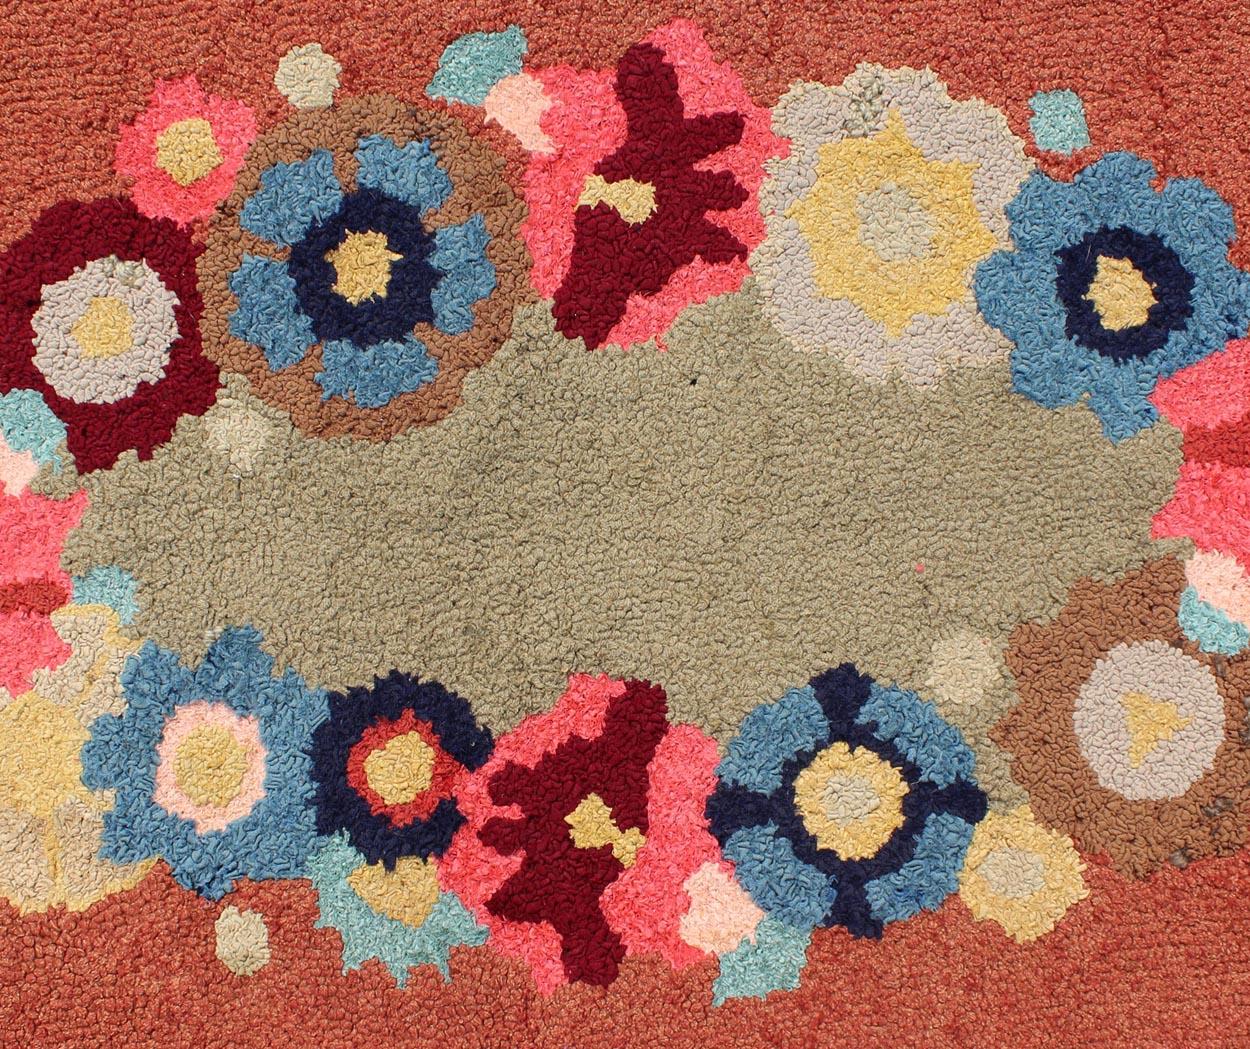 Oval shape American Hooked rug with large flower design, rug S12-1206, country of origin / type: United States / Hooked, circa 1950

This colorful American Hooked rug depicts a variety of vines and blossoming flowers in an assortment of colors